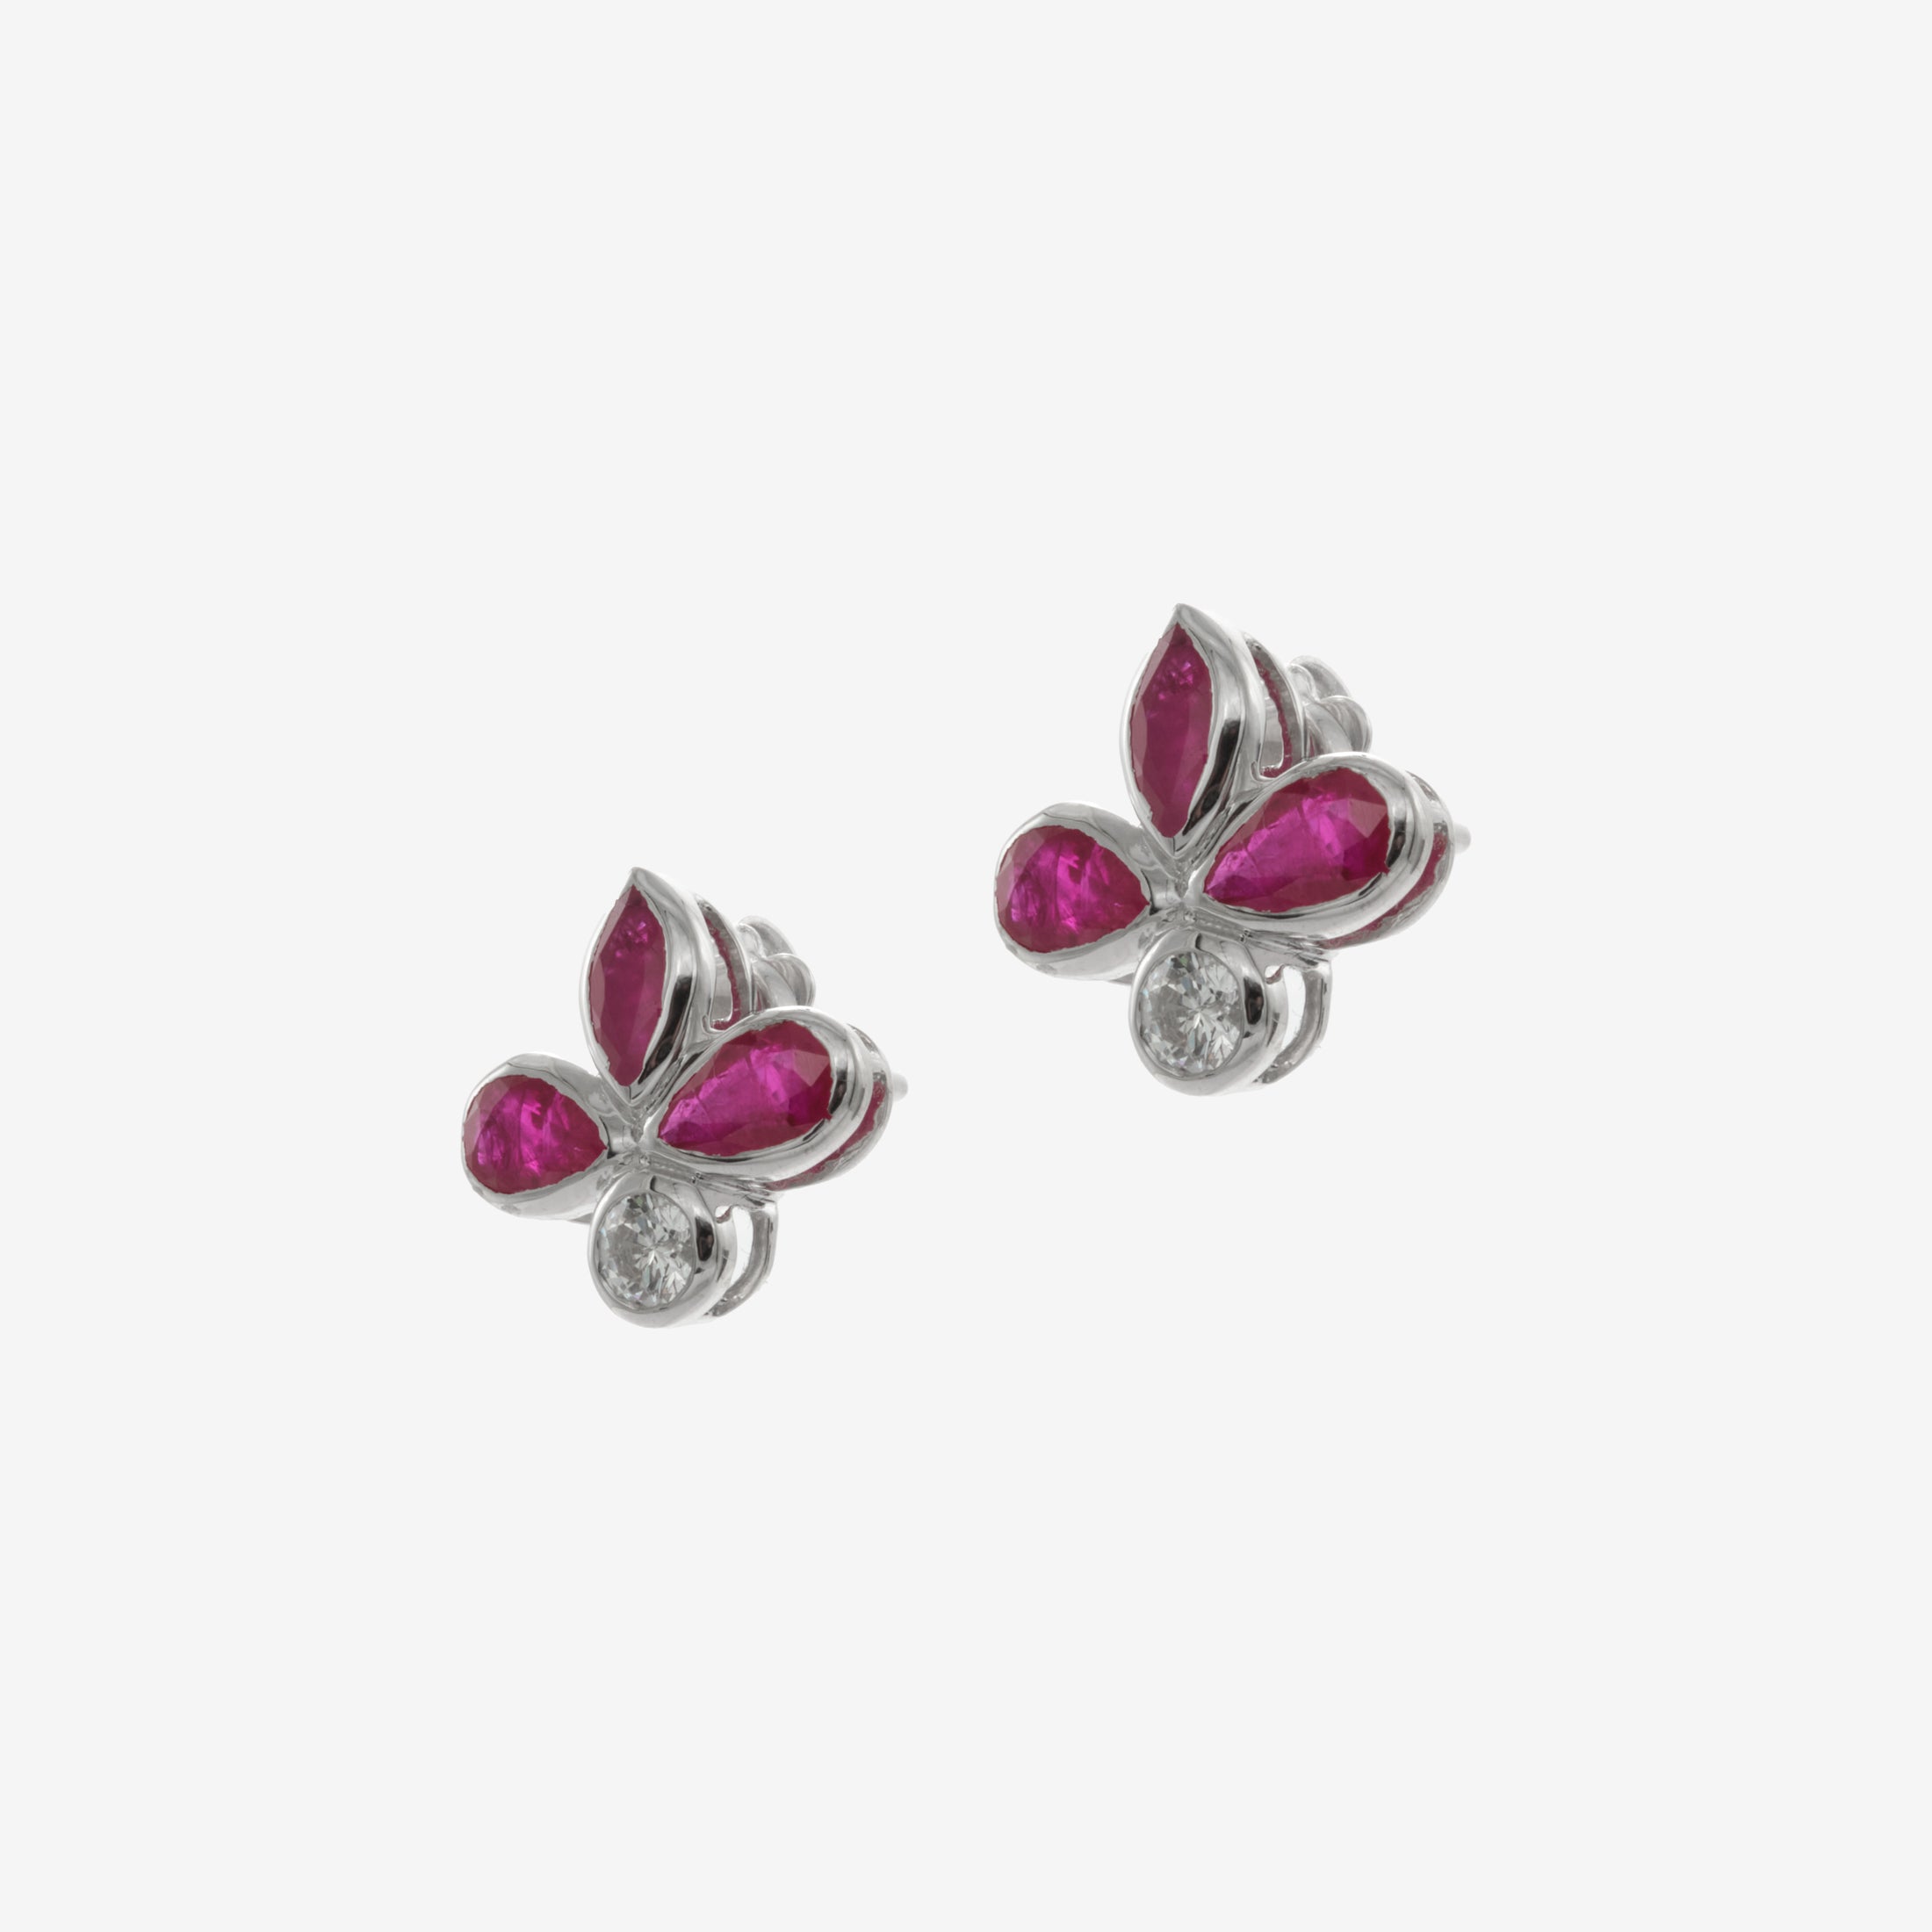 Misty earrings with rubies and diamonds